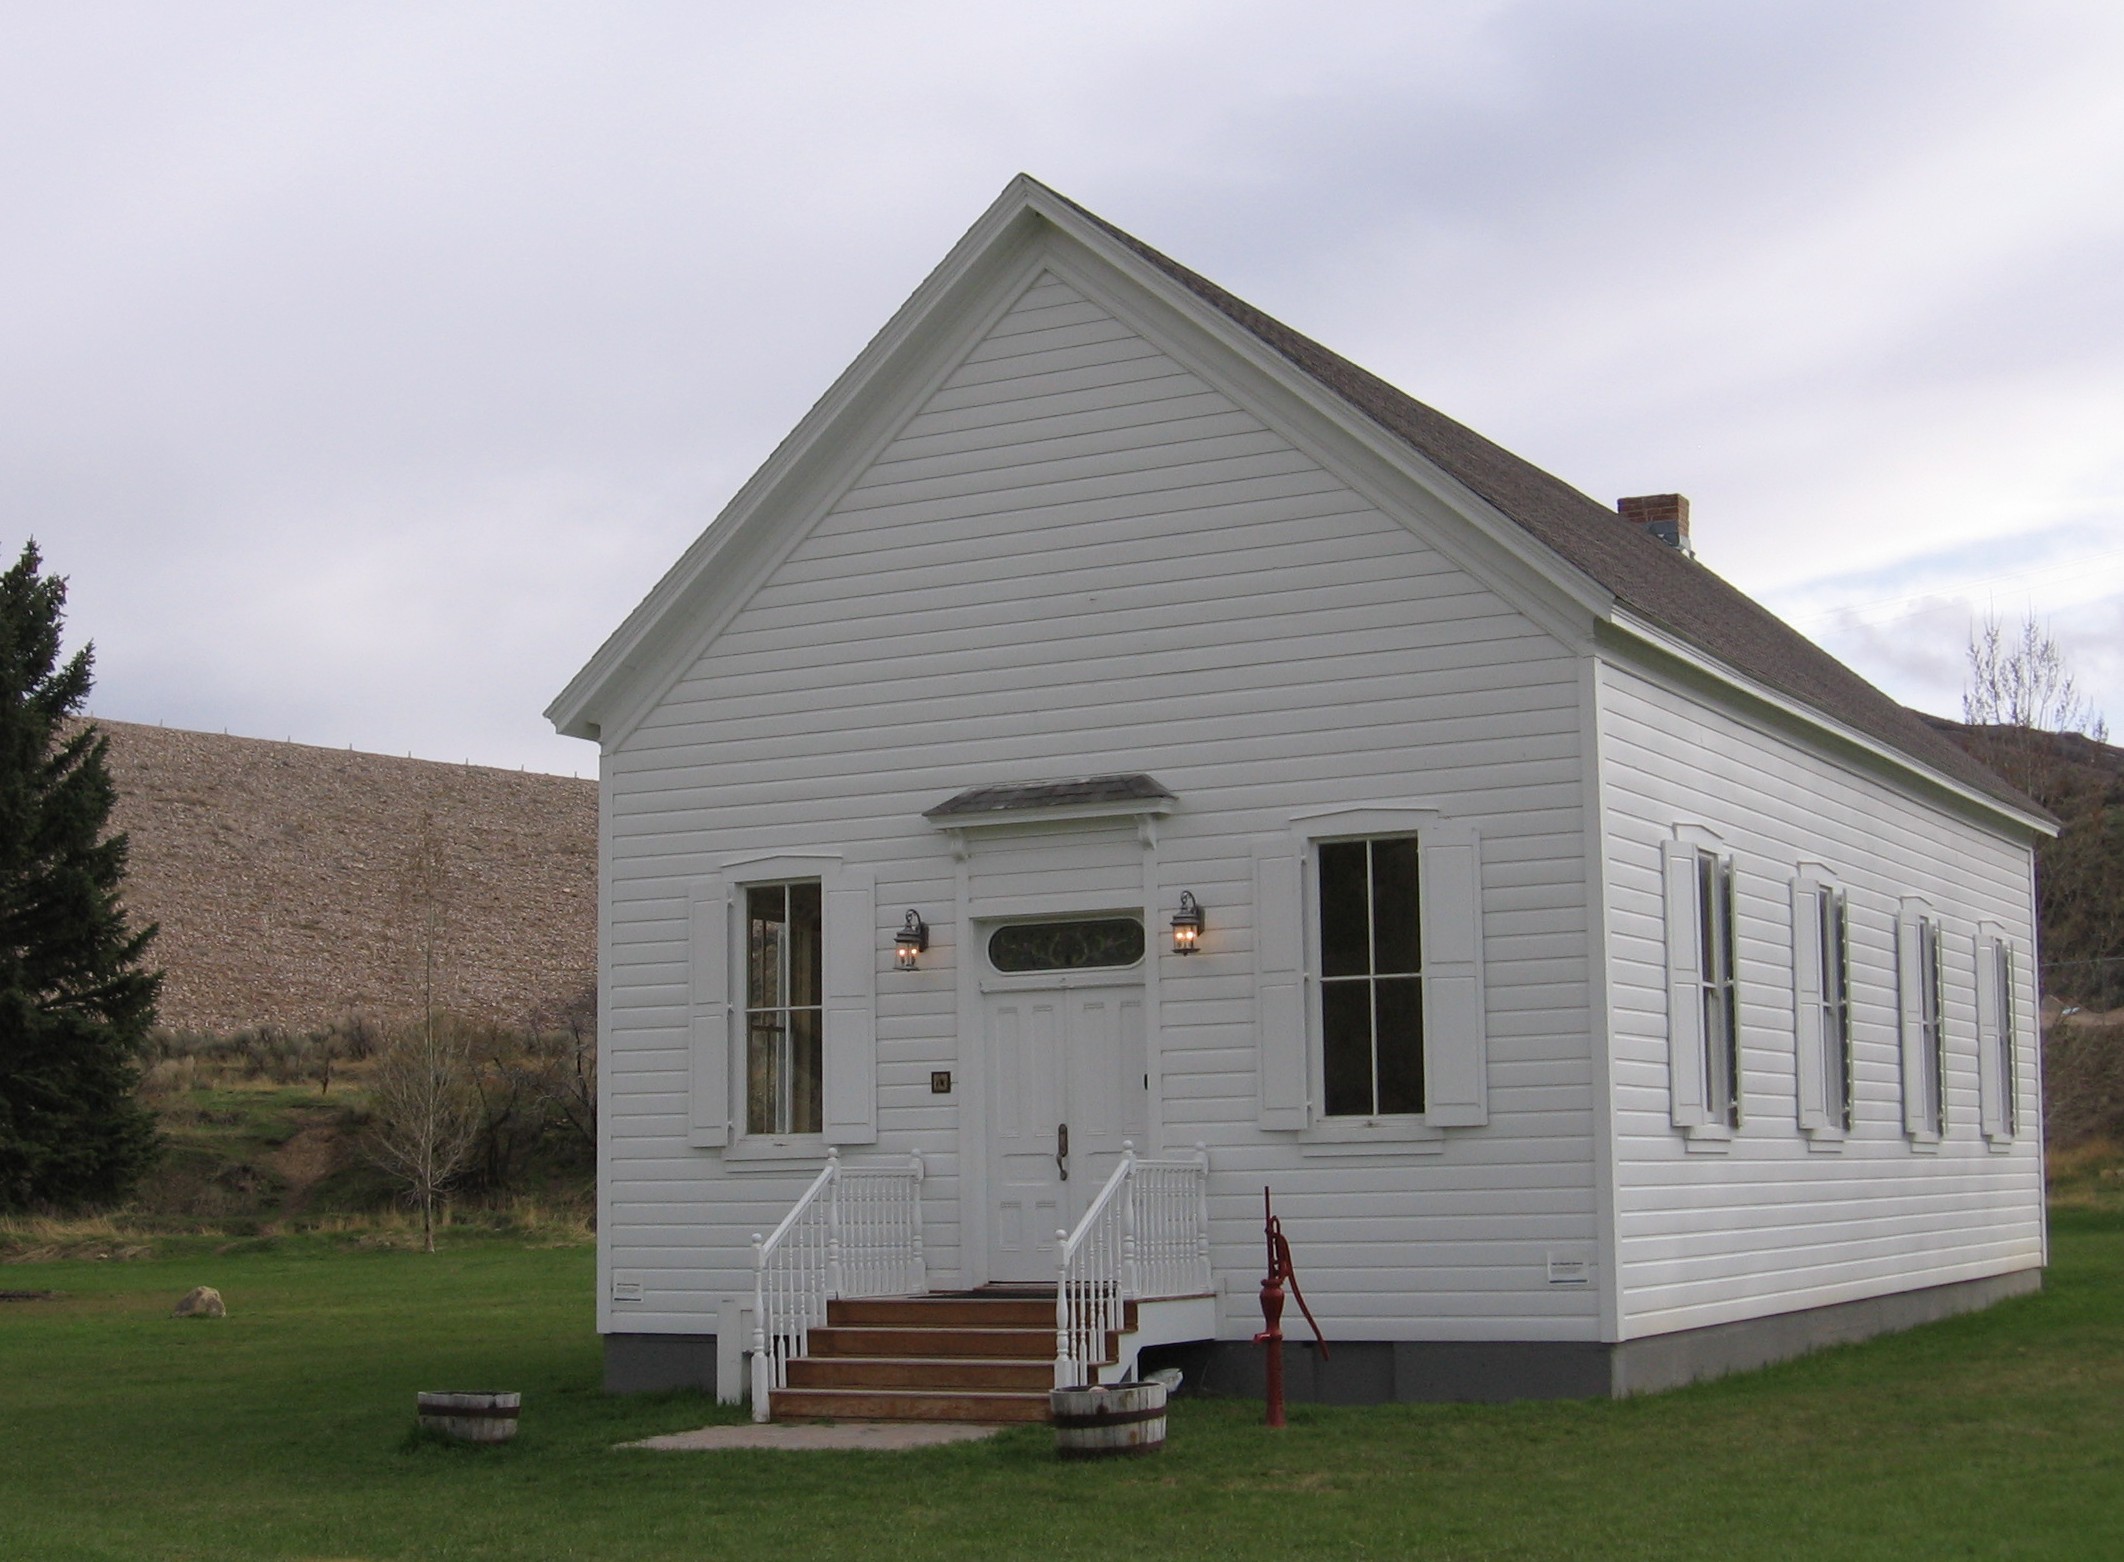 The Historic Rockport Old Church Community Dance presented 